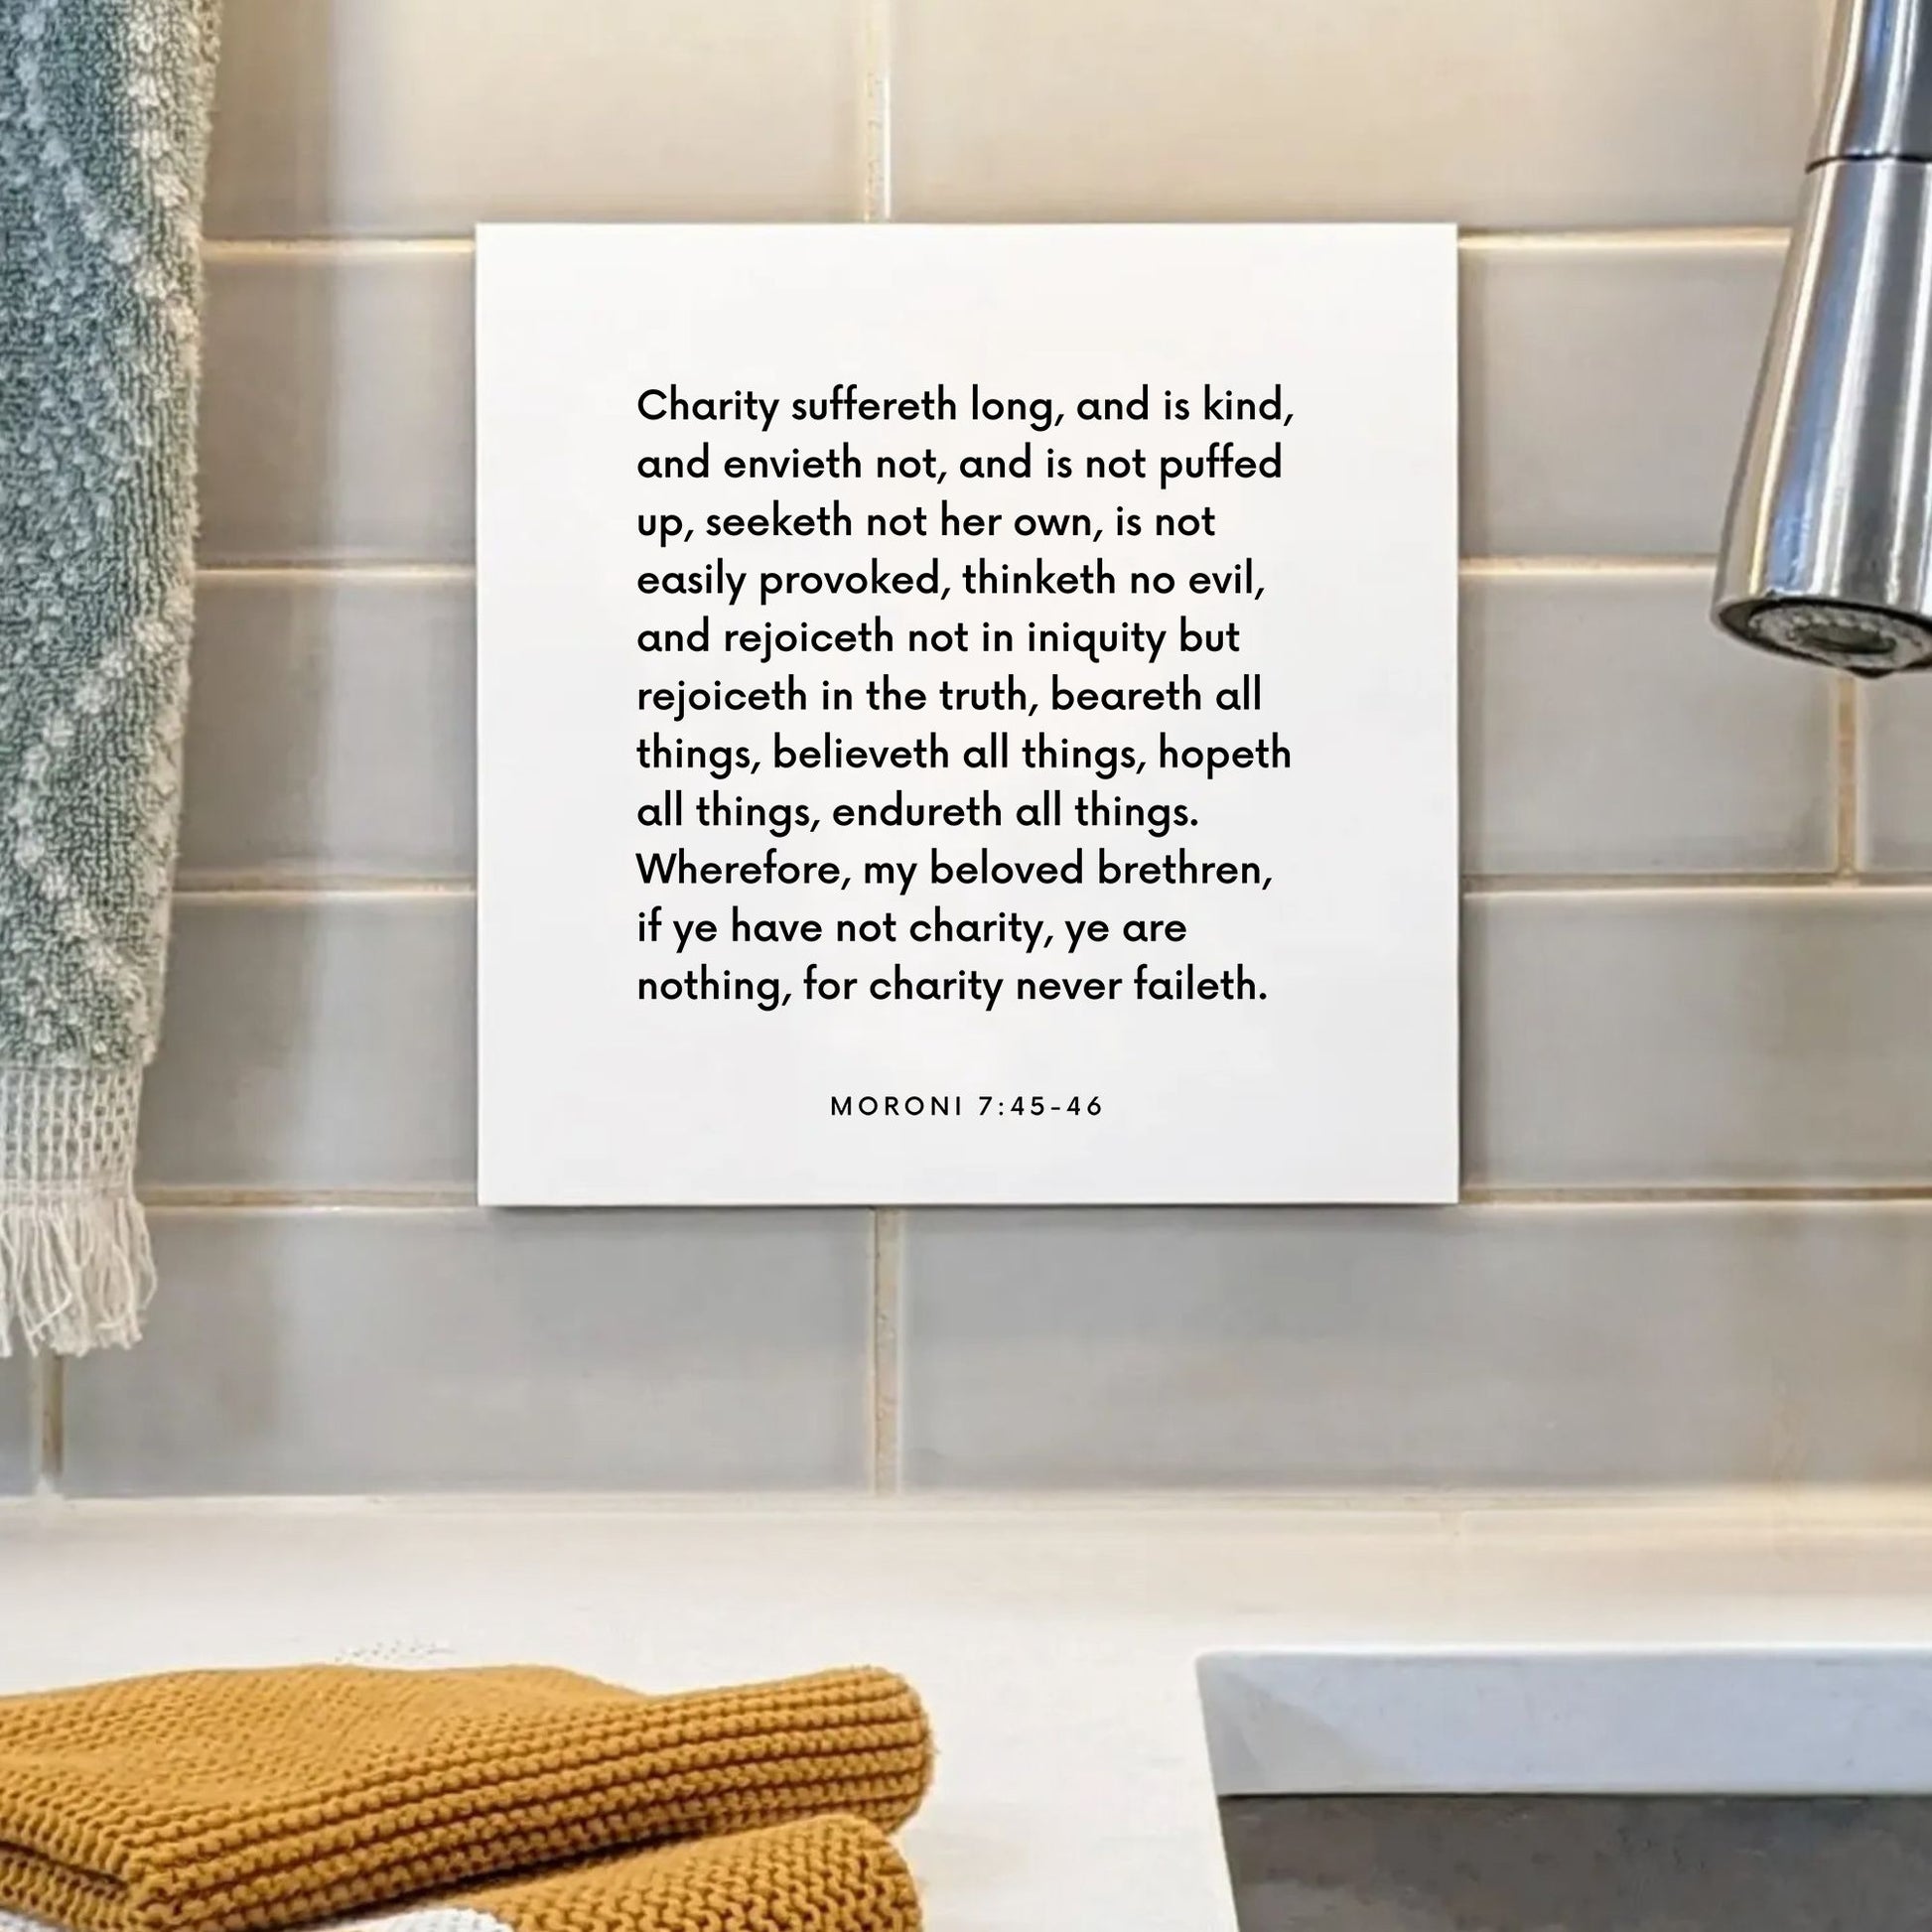 Sink mouting of the scripture tile for Moroni 7:45-46 - "Charity suffereth long, and is kind"